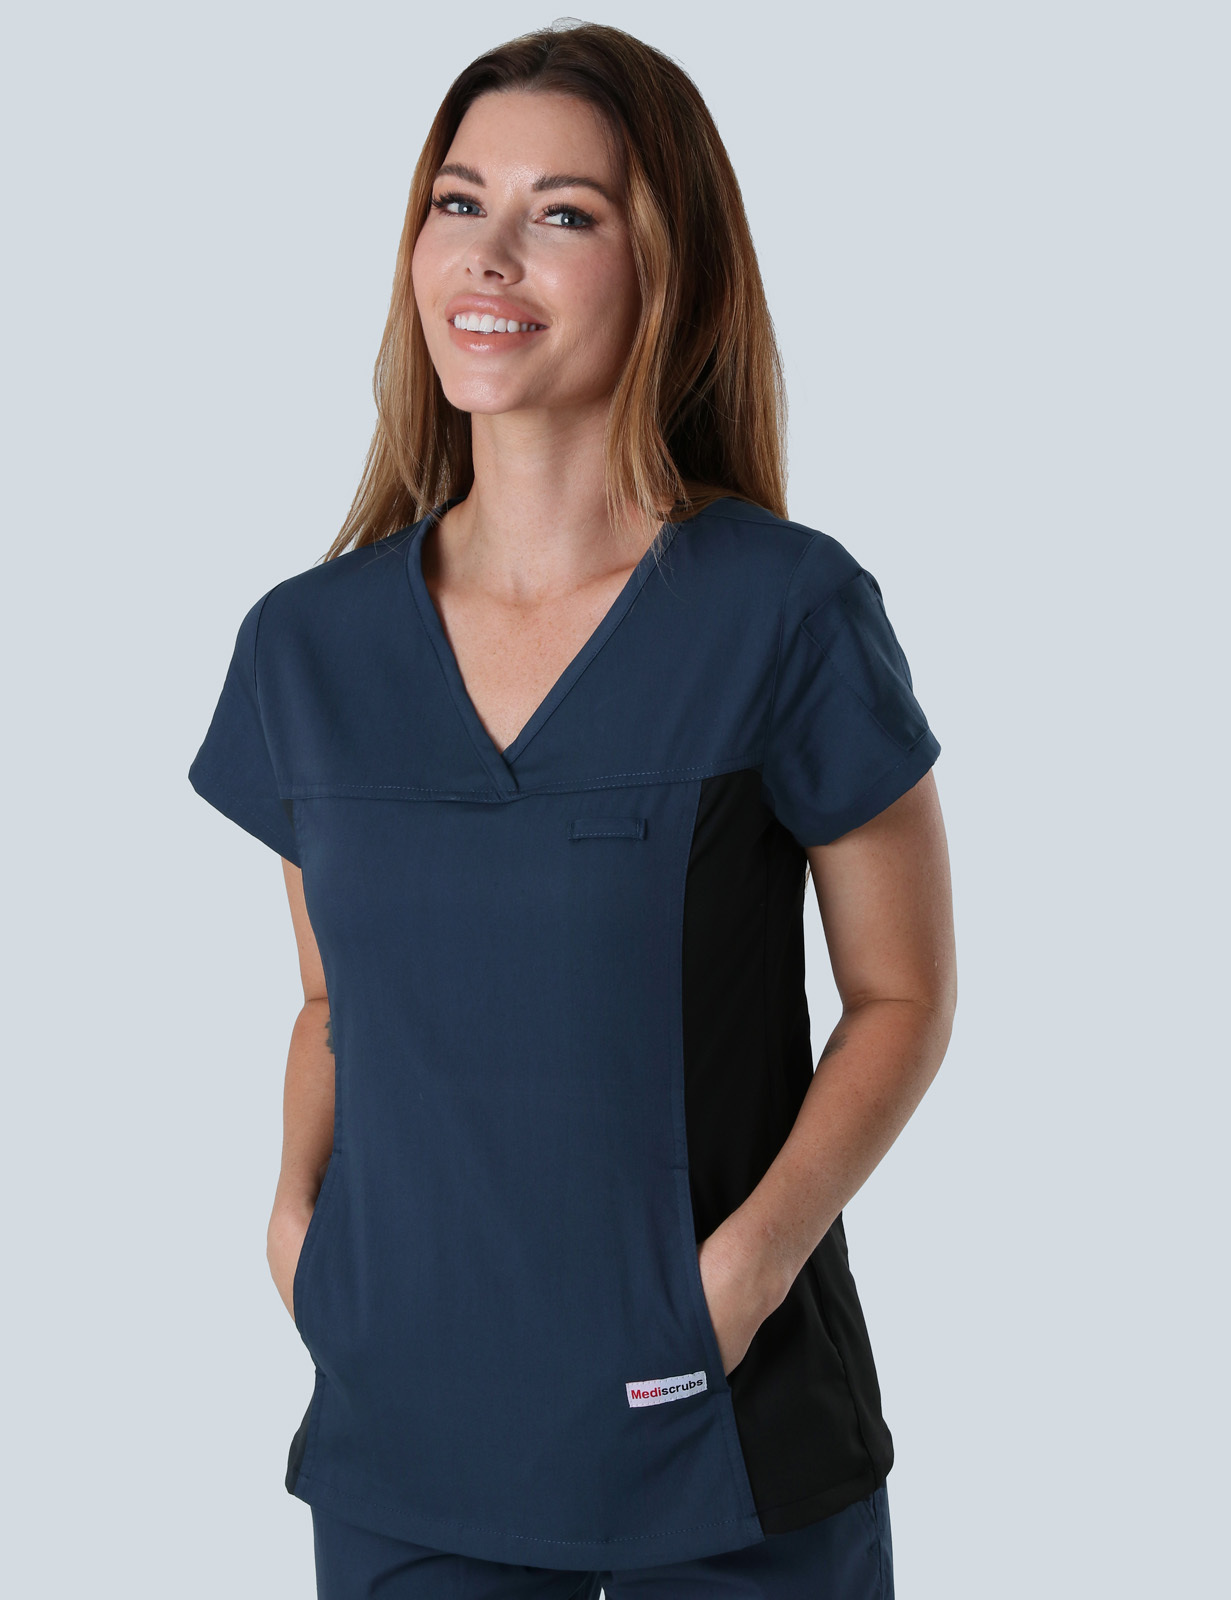 RBWH - 7a South RN (Women's Fit Spandex with Cargos in Navy + Logos)